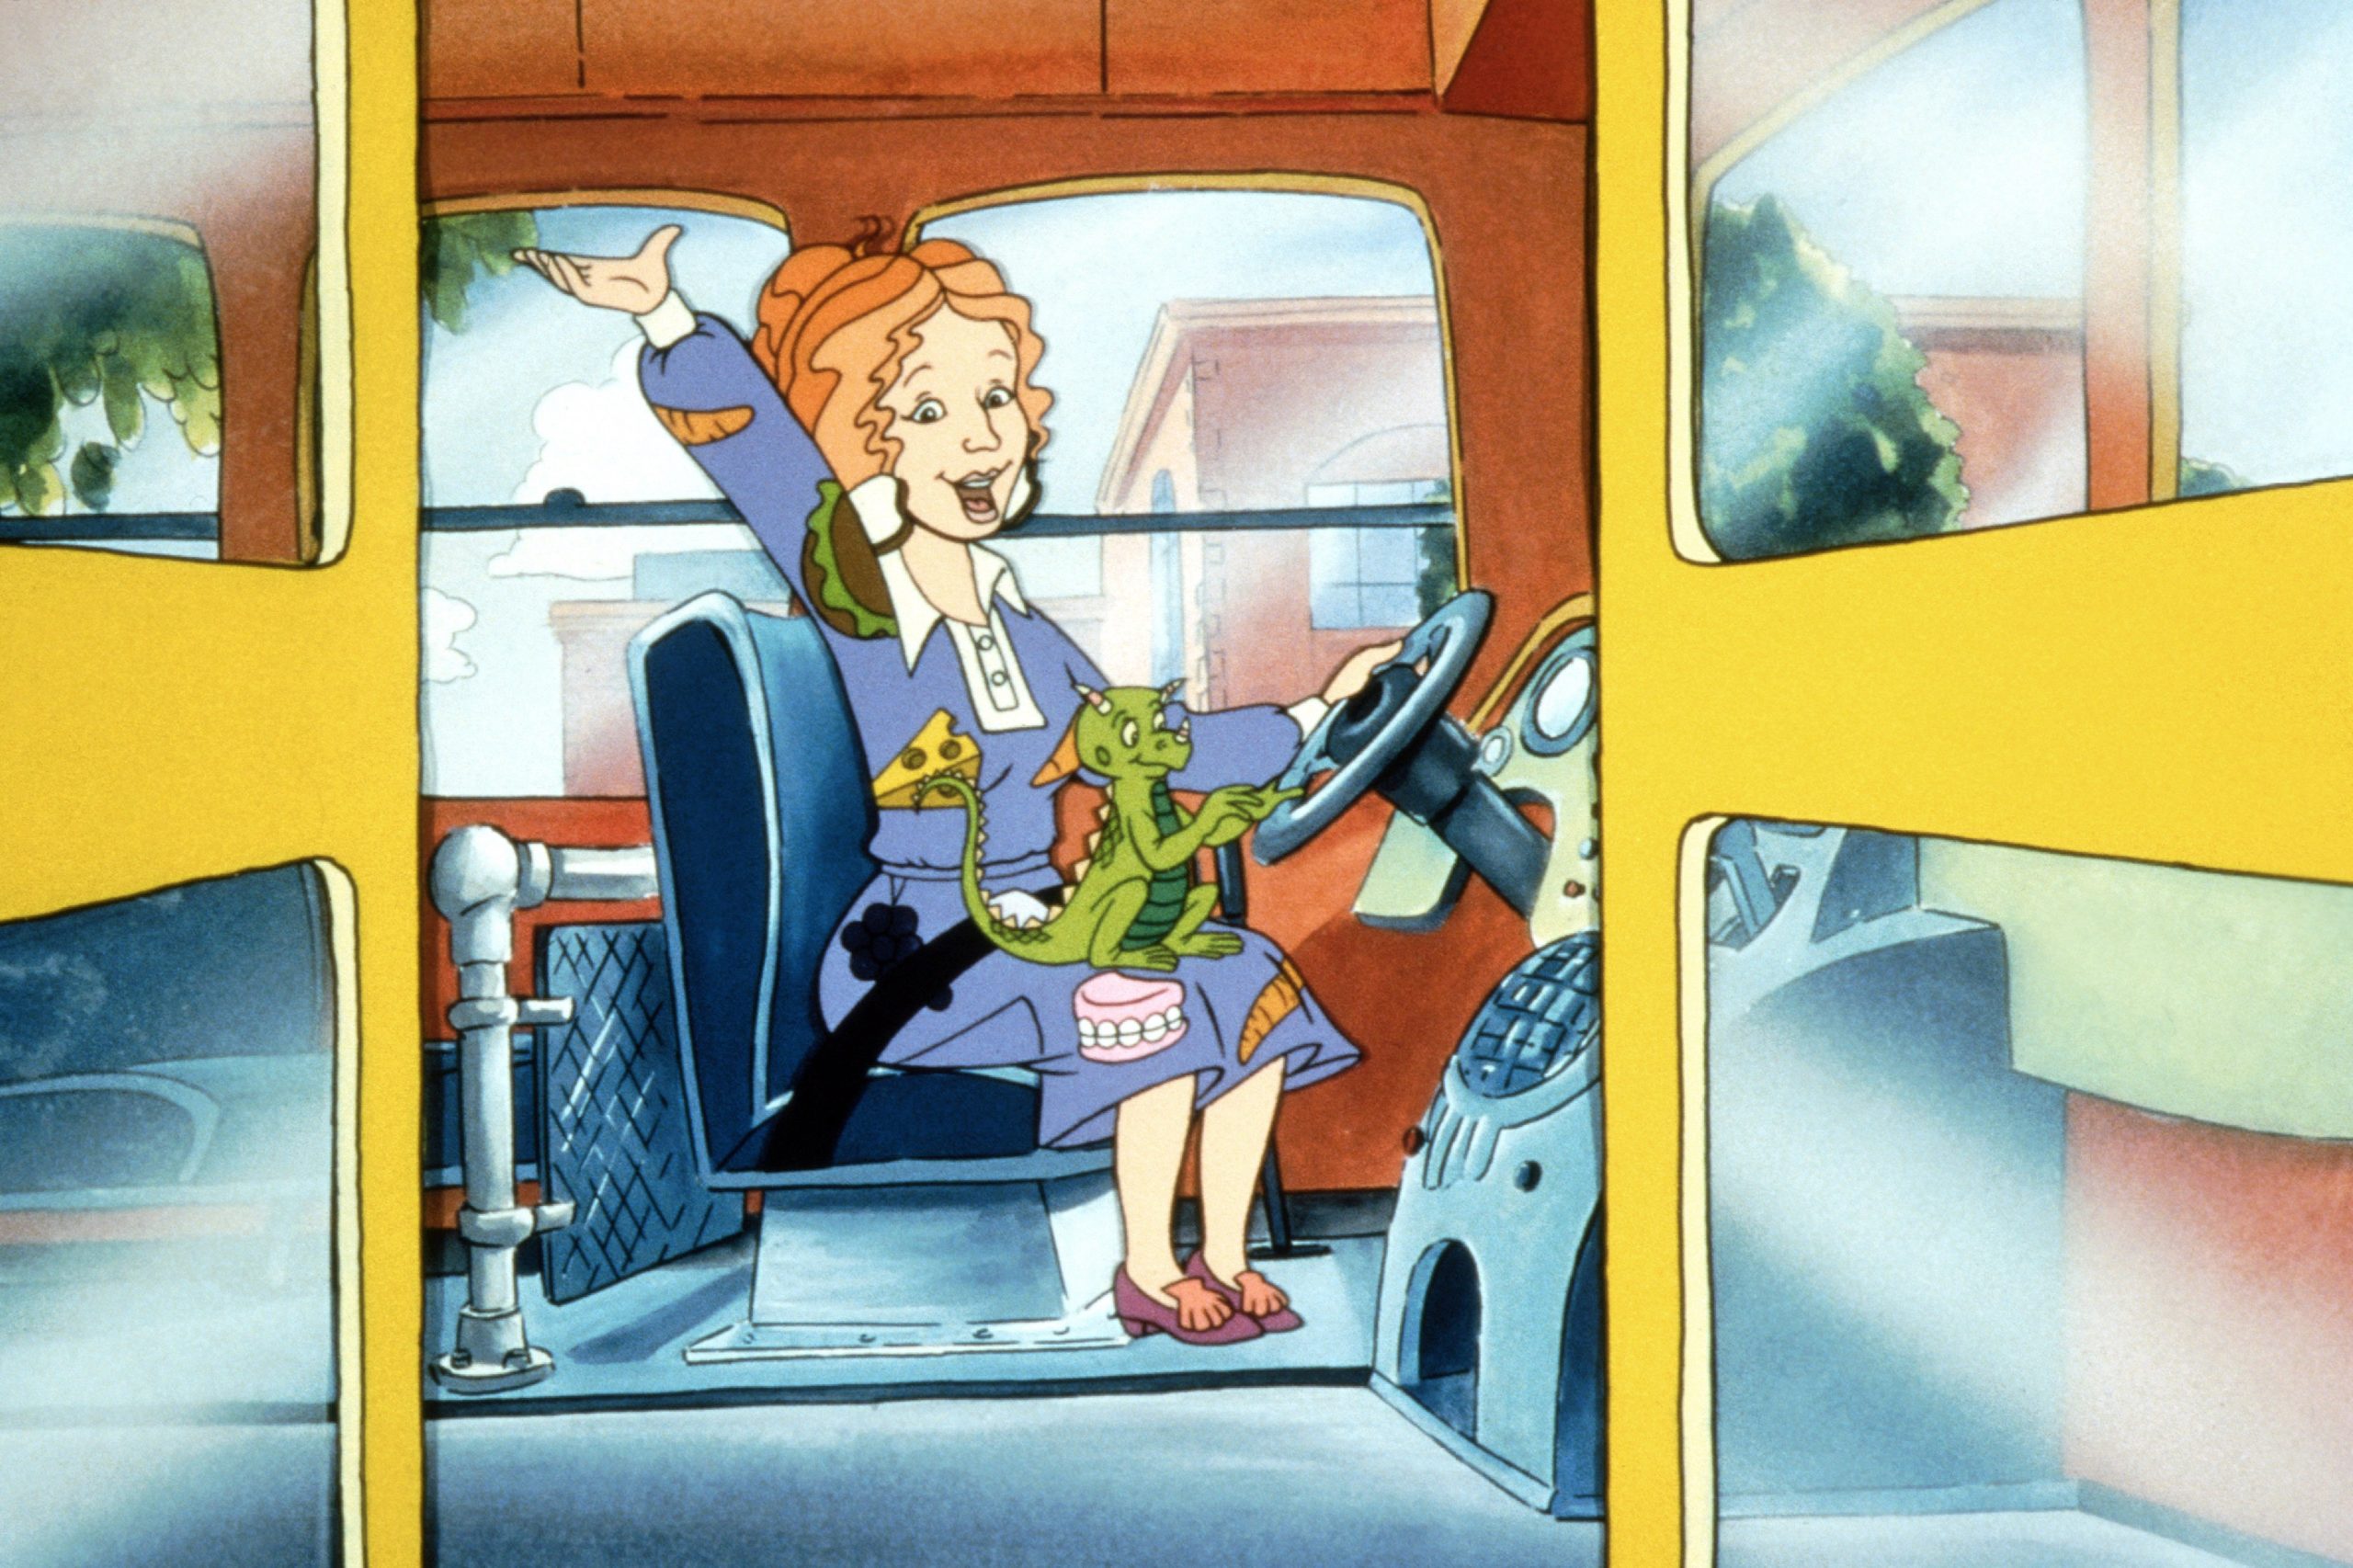 THE MAGIC SCHOOL BUS, (from left): Ms. Valerie Frizzle with Liz the chameleon, 1994-97. photo: ©